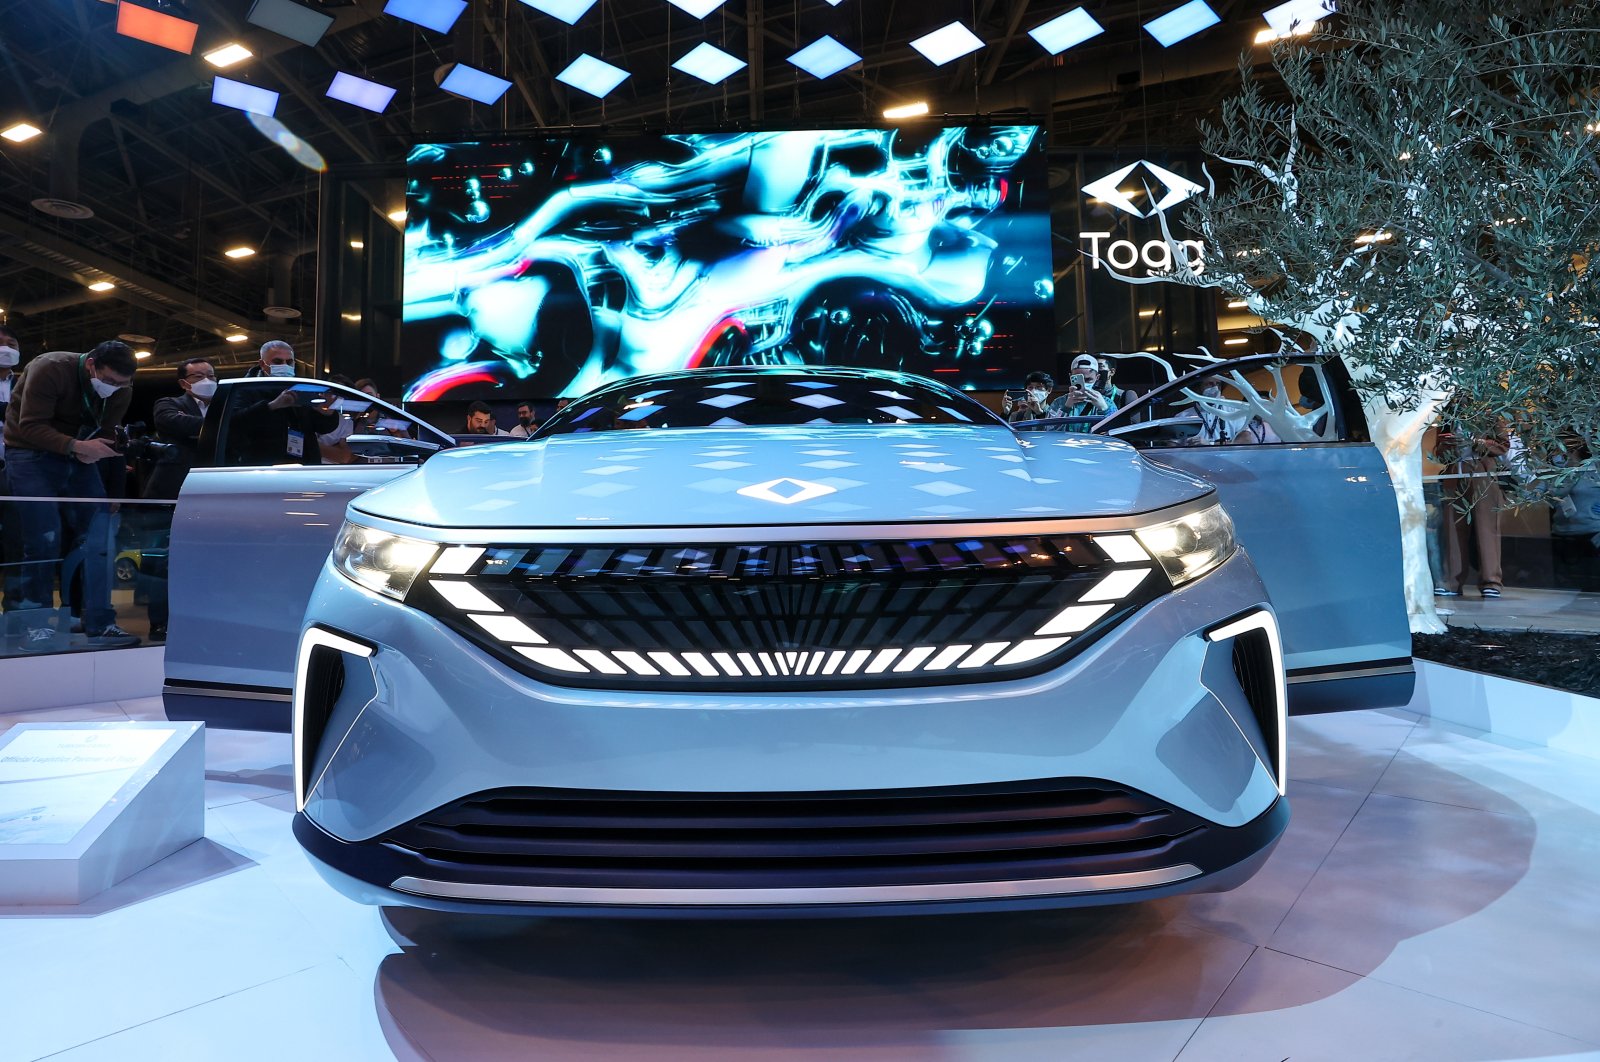 Togg&#039;s "Transition Concept" electric vehicle after it was unveiled during CES 2022 at the Las Vegas Convention Center in Las Vegas, Nevada, U.S., Jan. 5, 2022. (AA Photo)